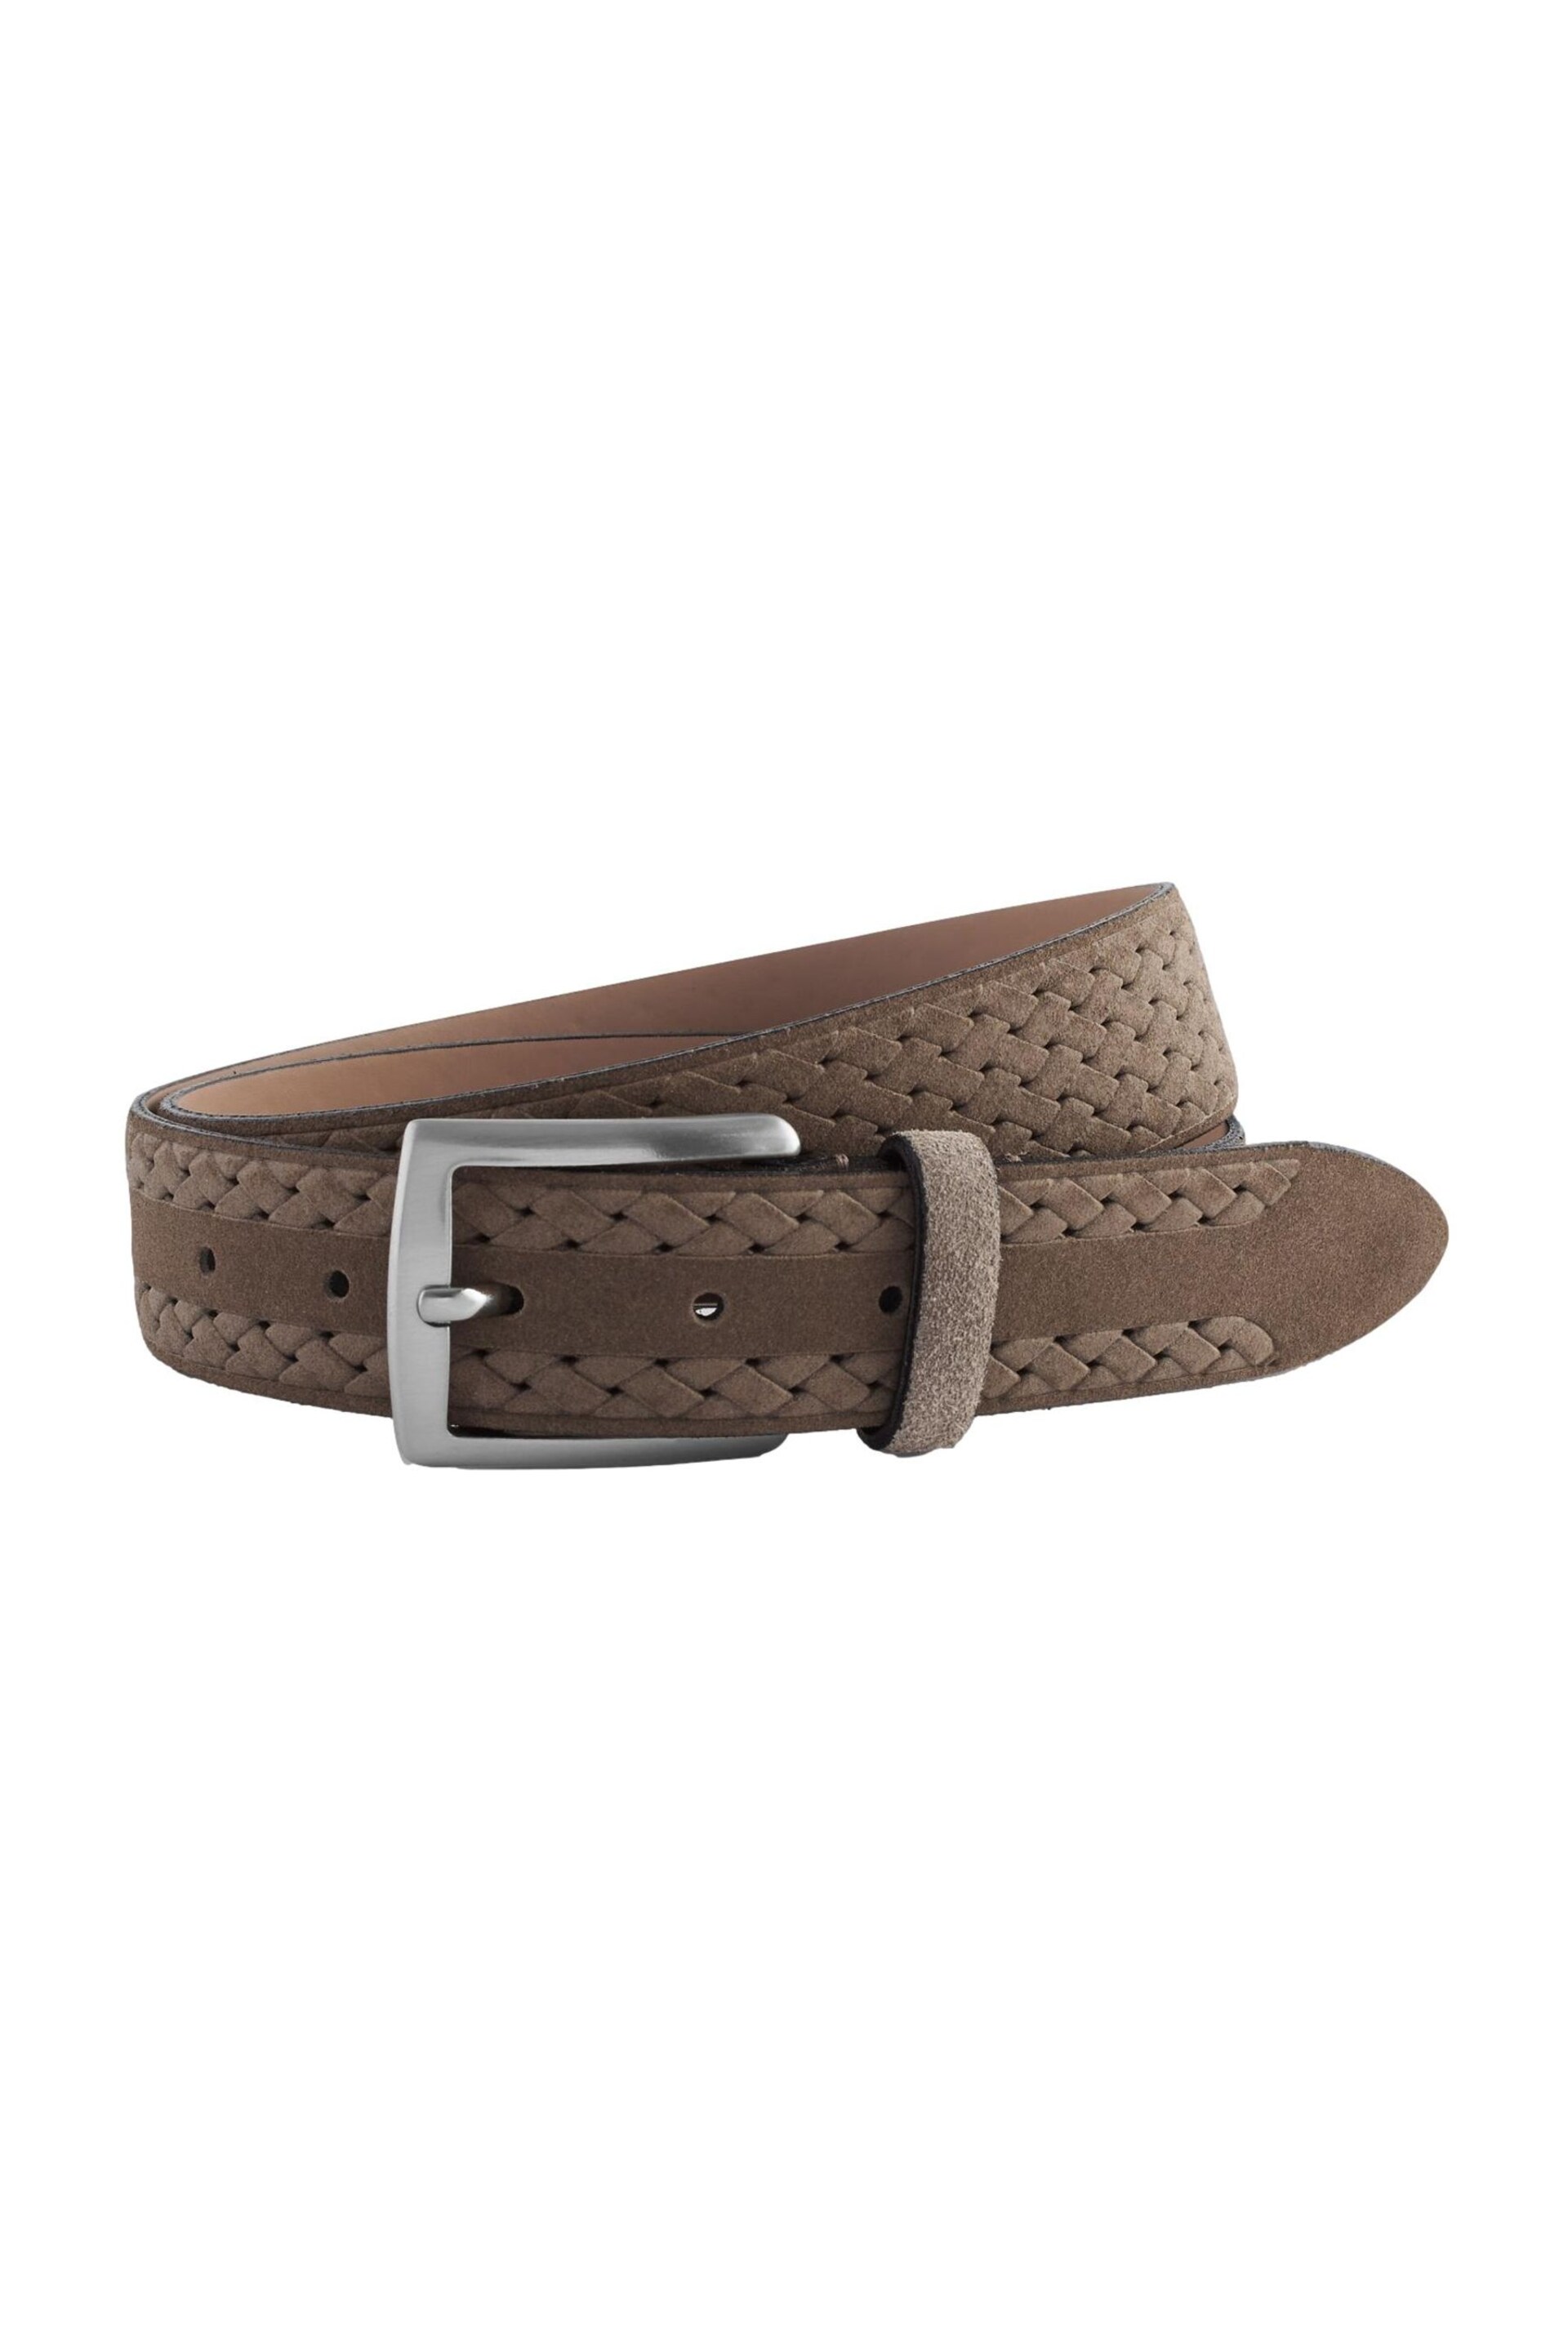 Taupe Brown Signature Suede Textured Belt - Image 4 of 4